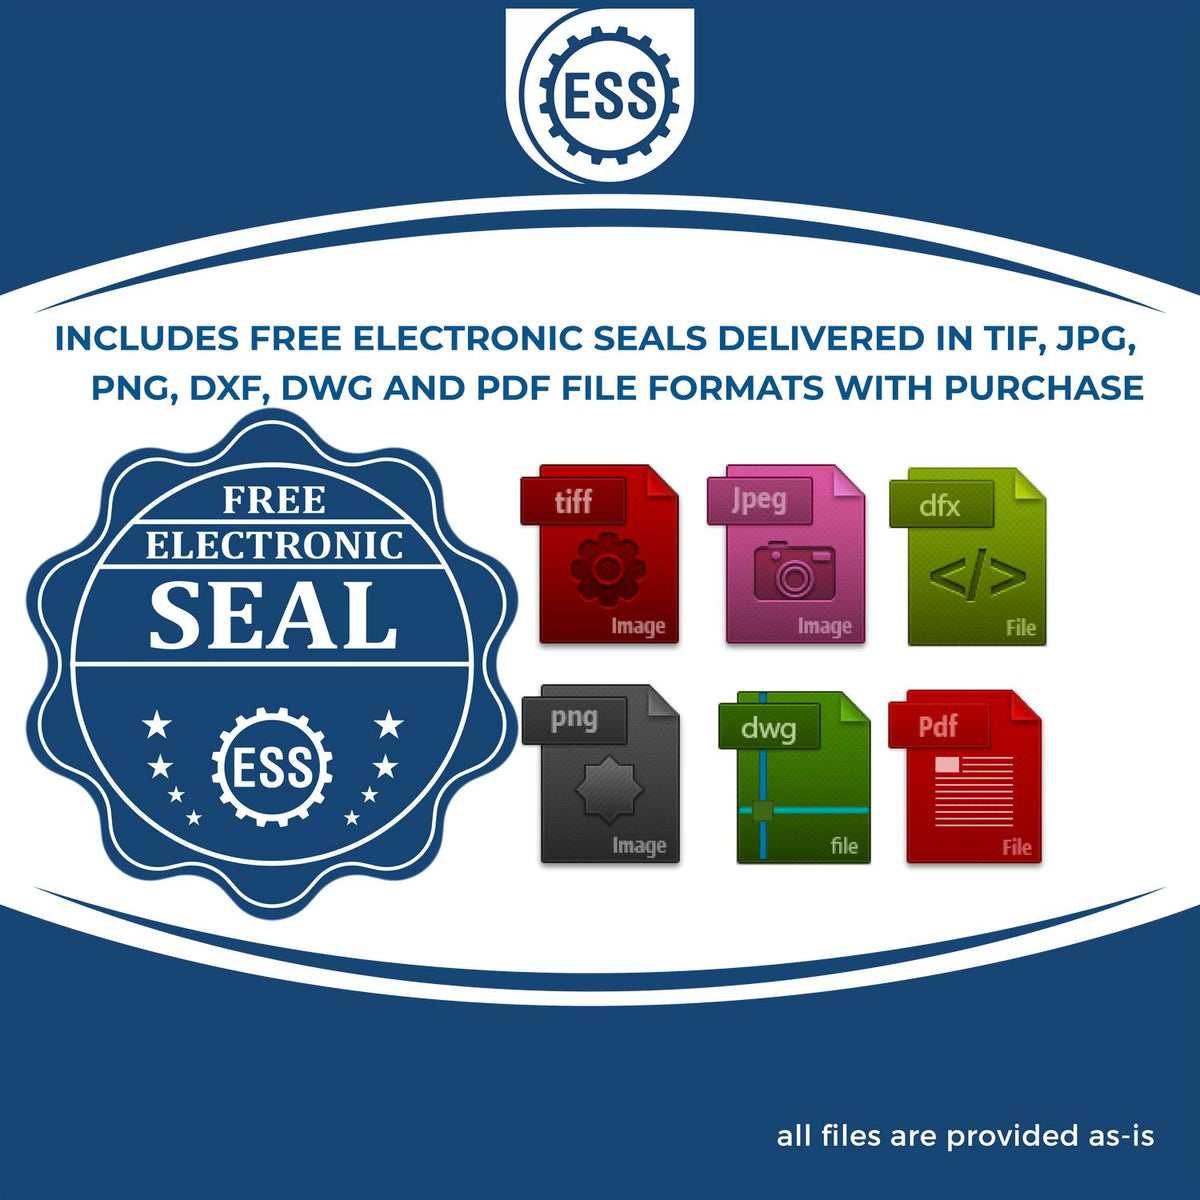 An infographic for the free electronic seal for the West Virginia Professional Engineer Seal Stamp illustrating the different file type icons such as DXF, DWG, TIF, JPG and PNG.